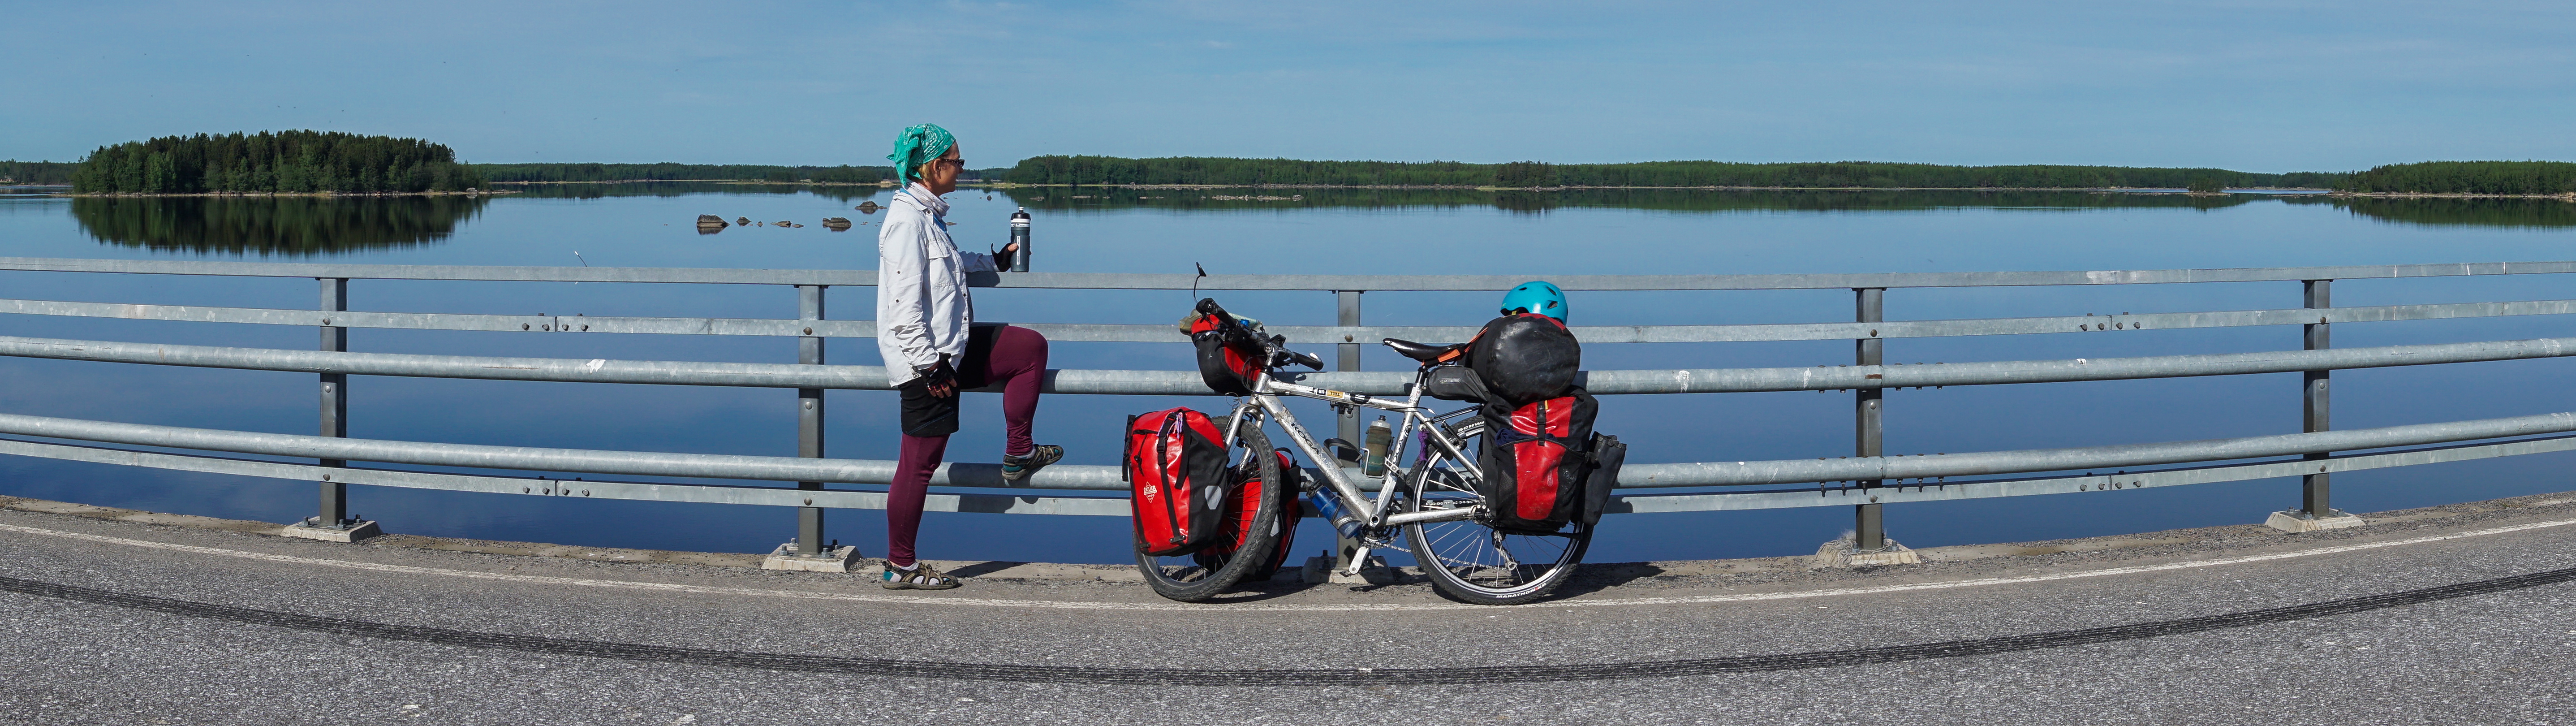 Finland bicycle touring